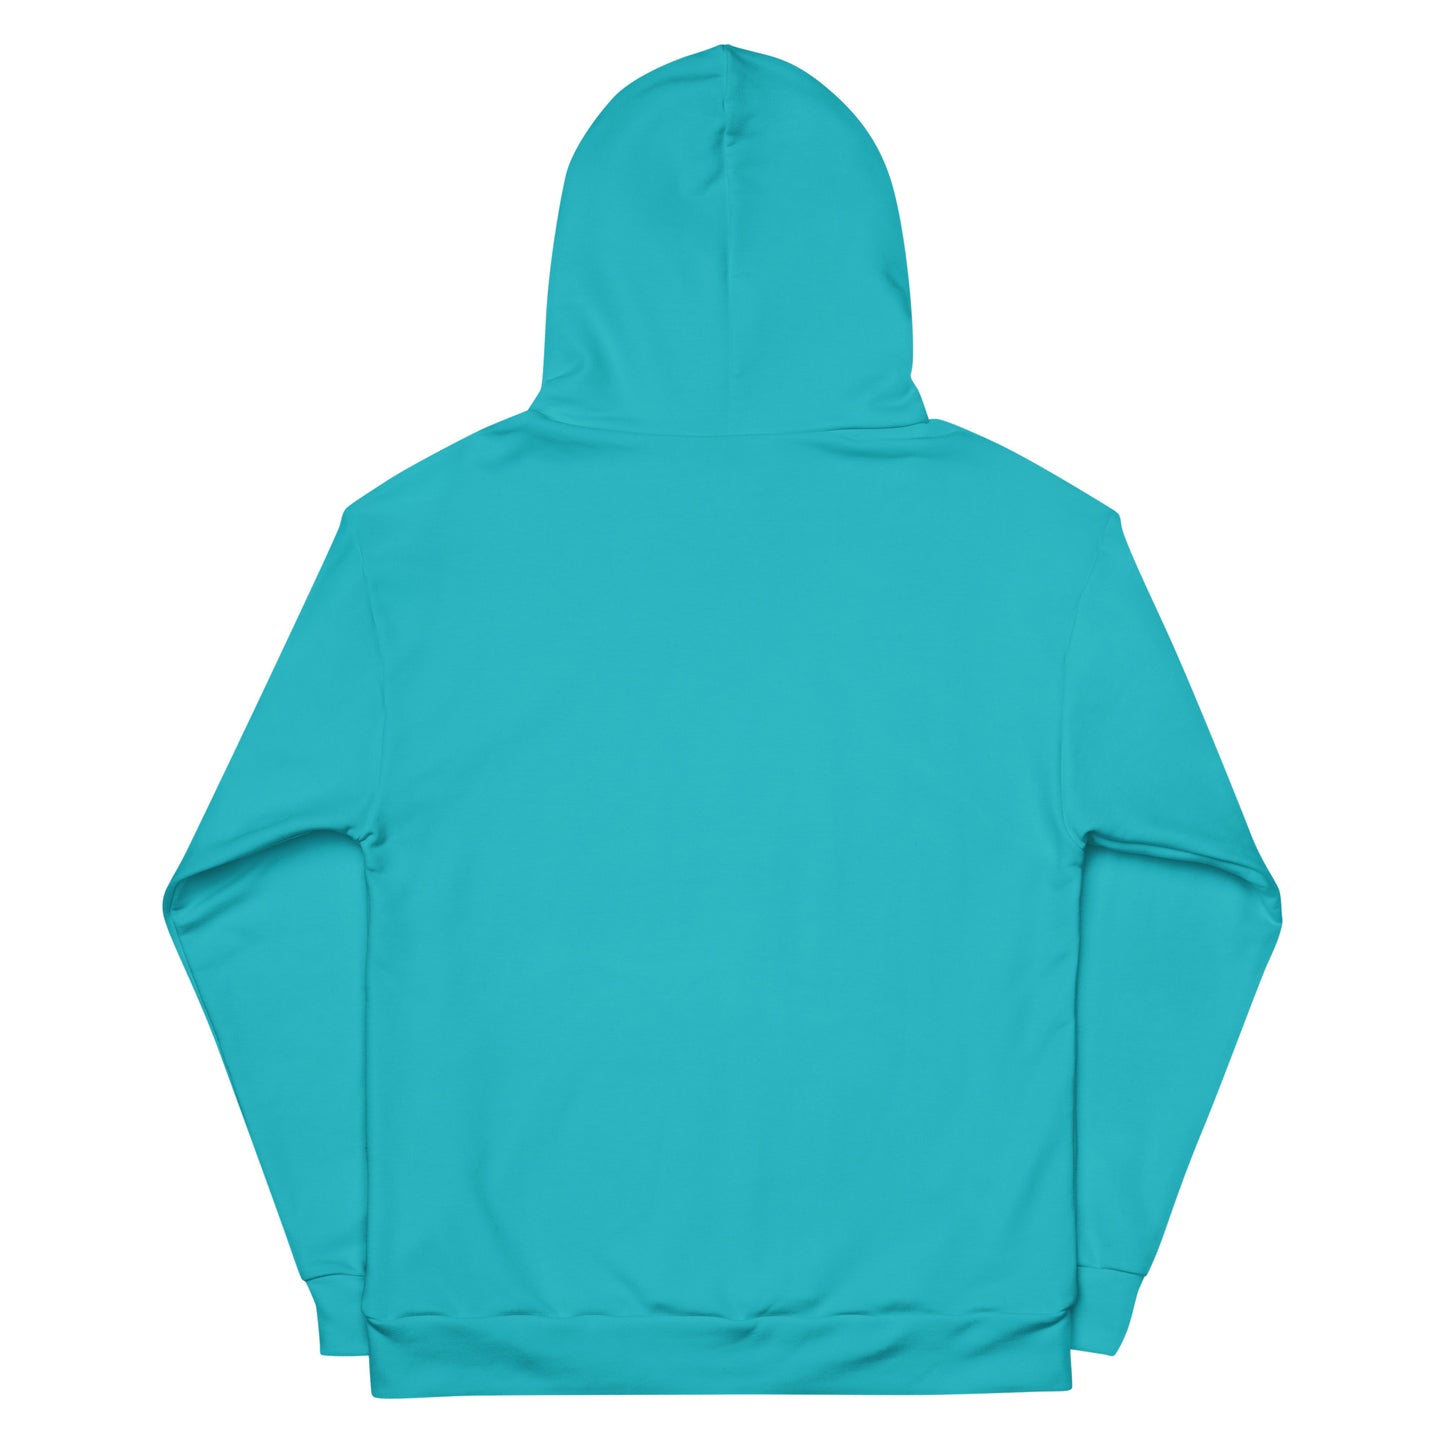 Cyan Climate Change Global Warming Statement - Sustainably Made Hoodie